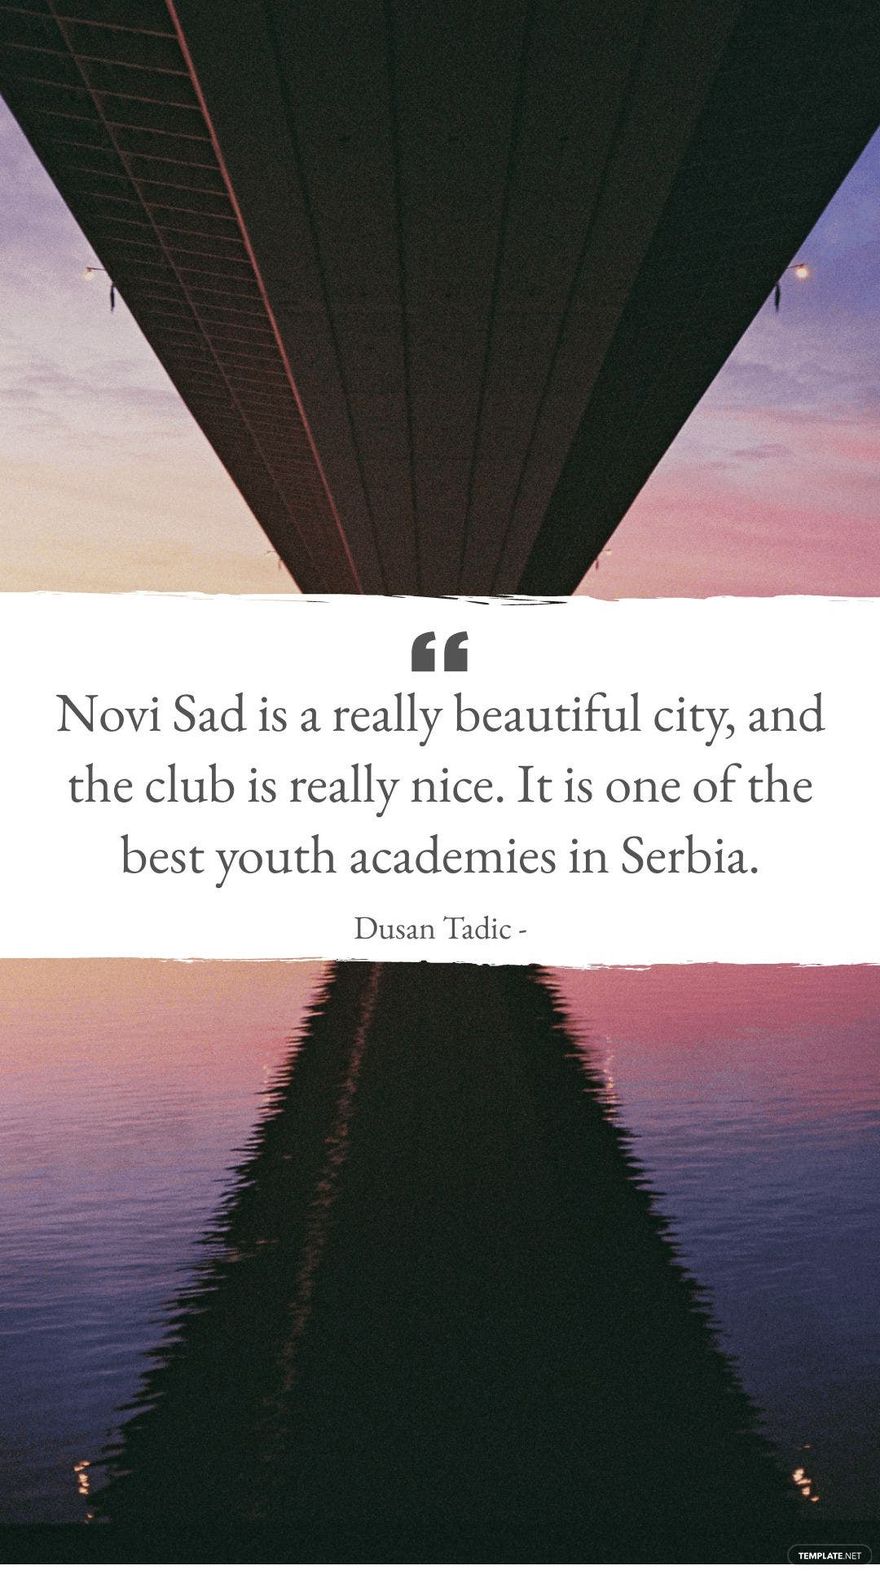 Dusan Tadic - Novi Sad is a really beautiful city, and the club is really nice. It is one of the best youth academies in Serbia. Template